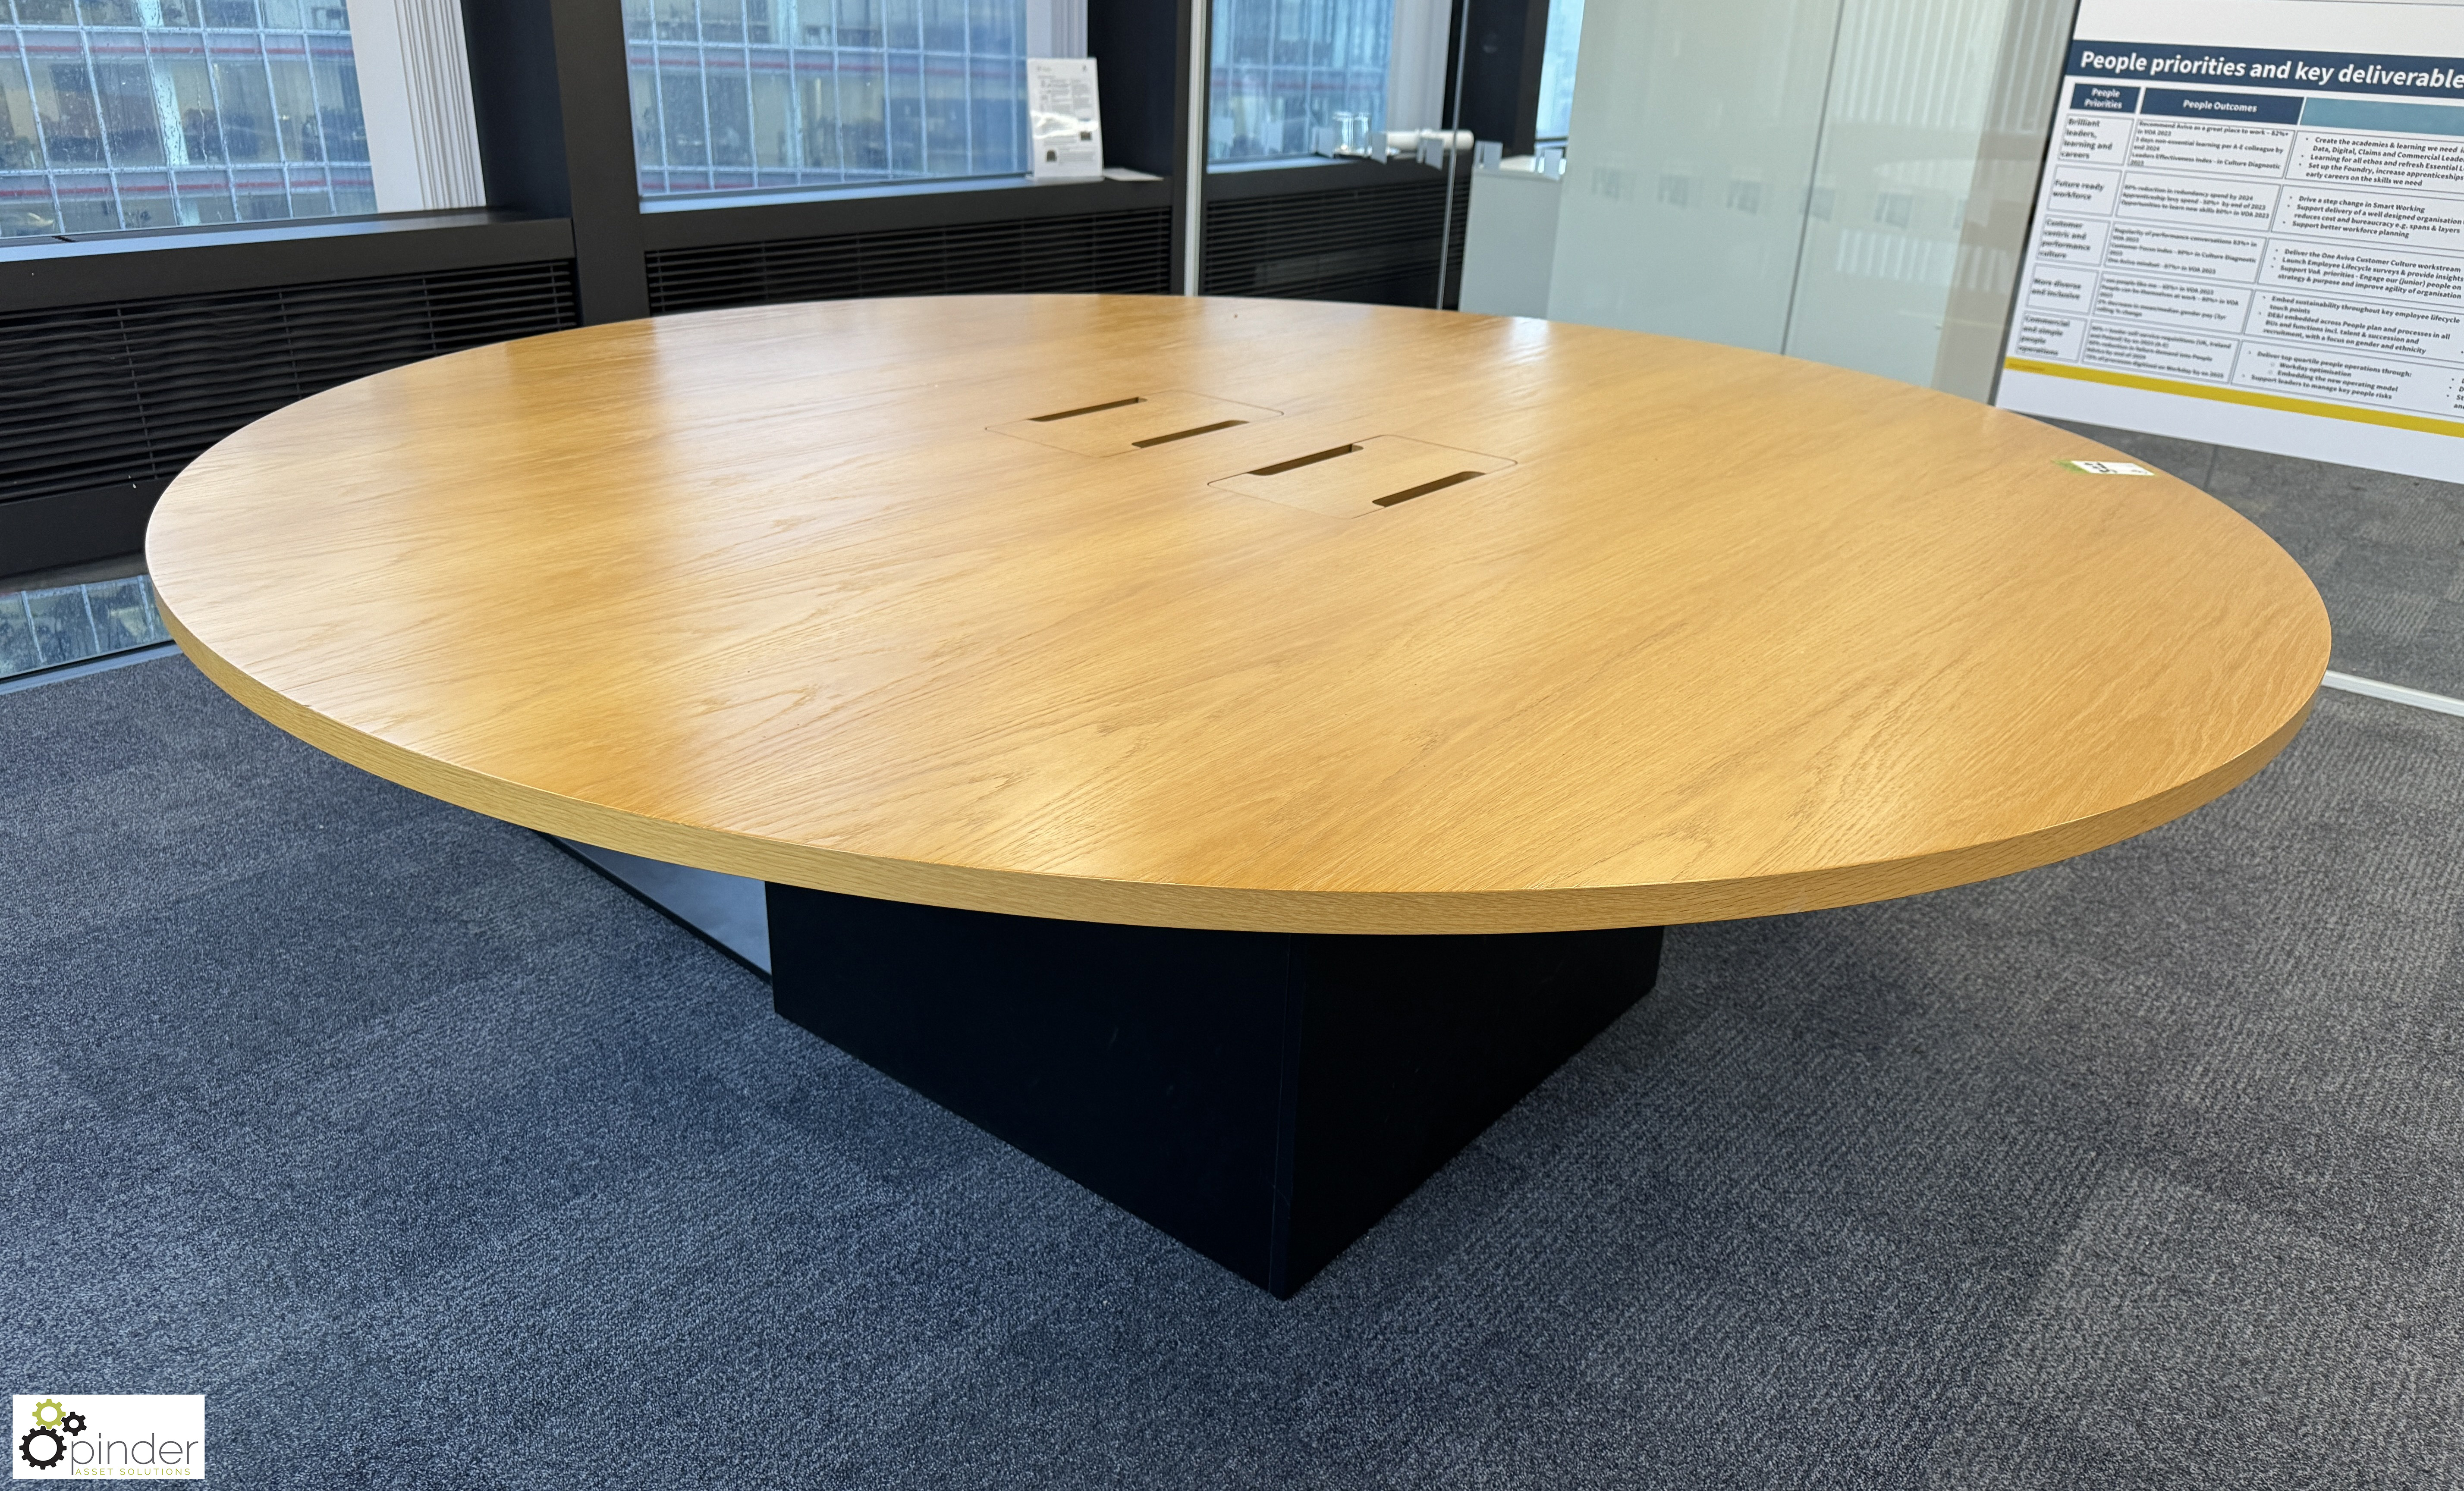 Light oak veneer circular Meeting Table, 2200mm x 750mm, with cable management and base (location in - Image 4 of 7